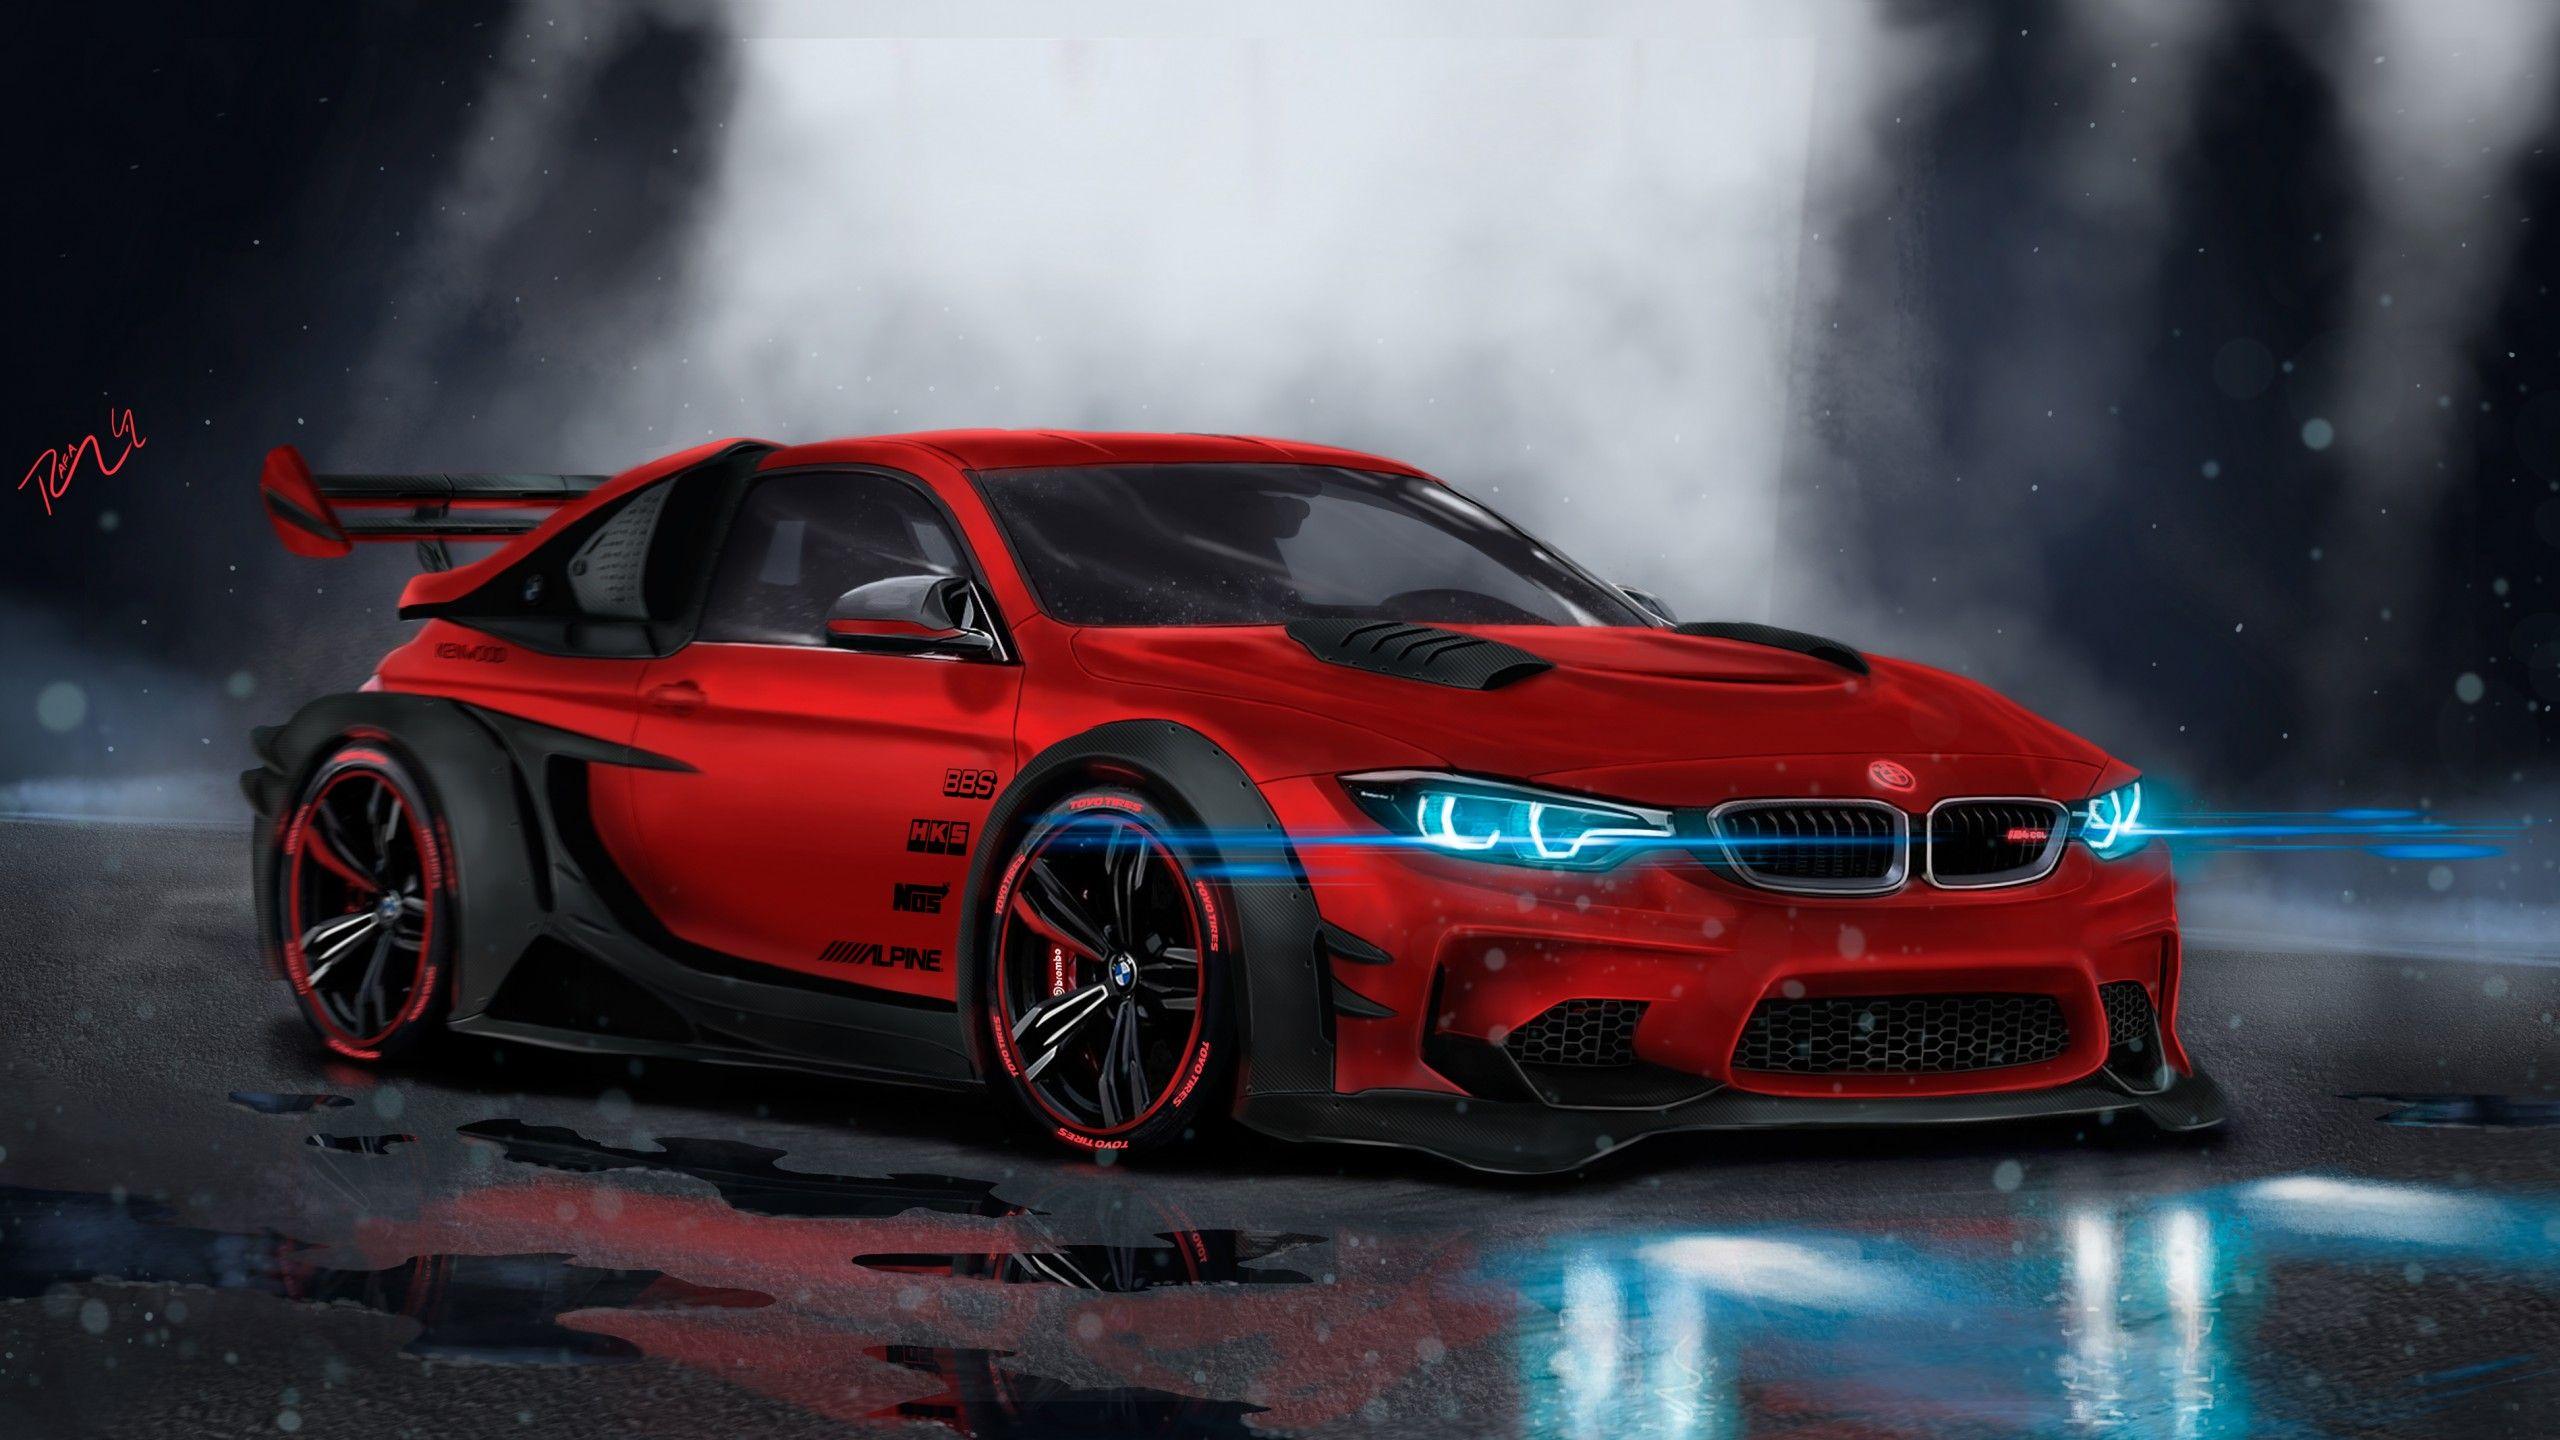 Wallpaper BMW M Custom, CGI, Neon, Sport car, HD, 4K, Automotive / Cars,. Wallpaper for iPhone, Android, Mobile and Desktop